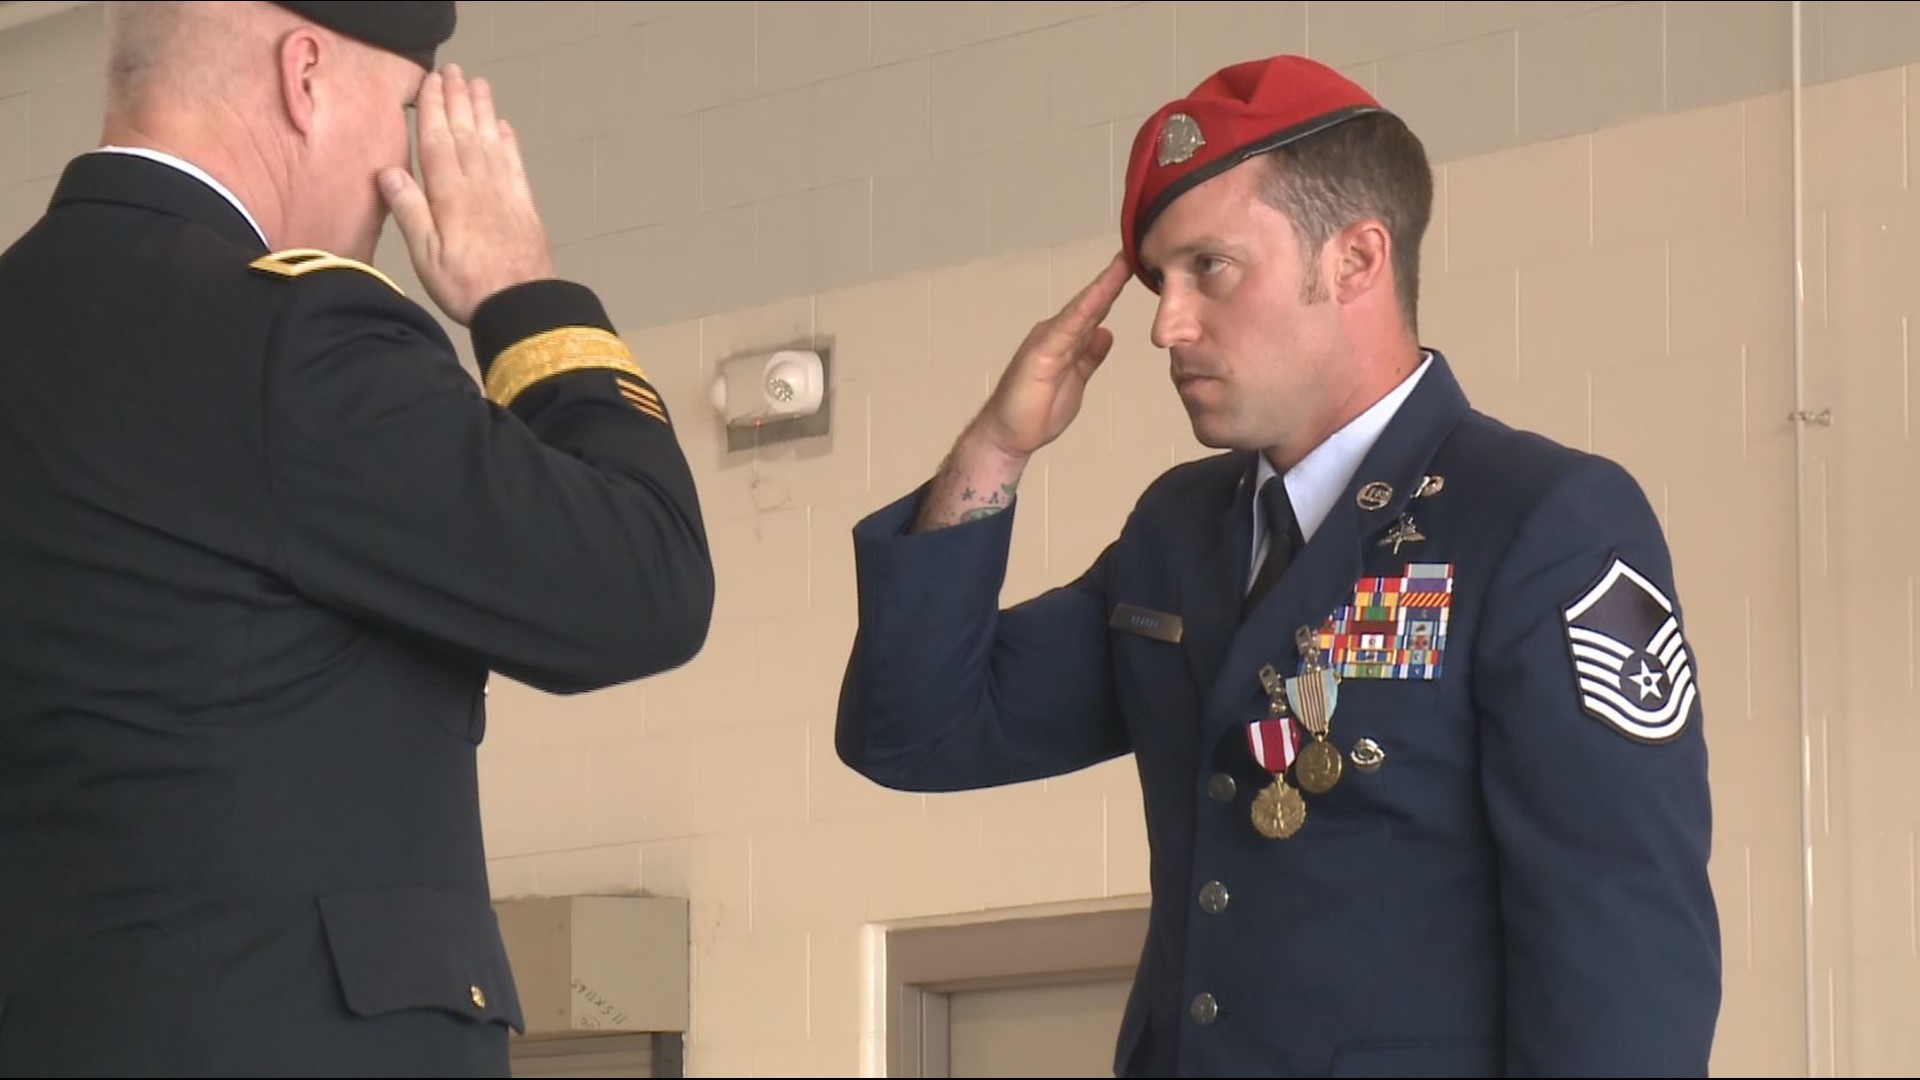 Officials said Master Sgt. Daniel Keller, a combat controller in the Kentucky Air Guard's 123rd Special Tactics Squadron, was recognized for his life-saving actions.